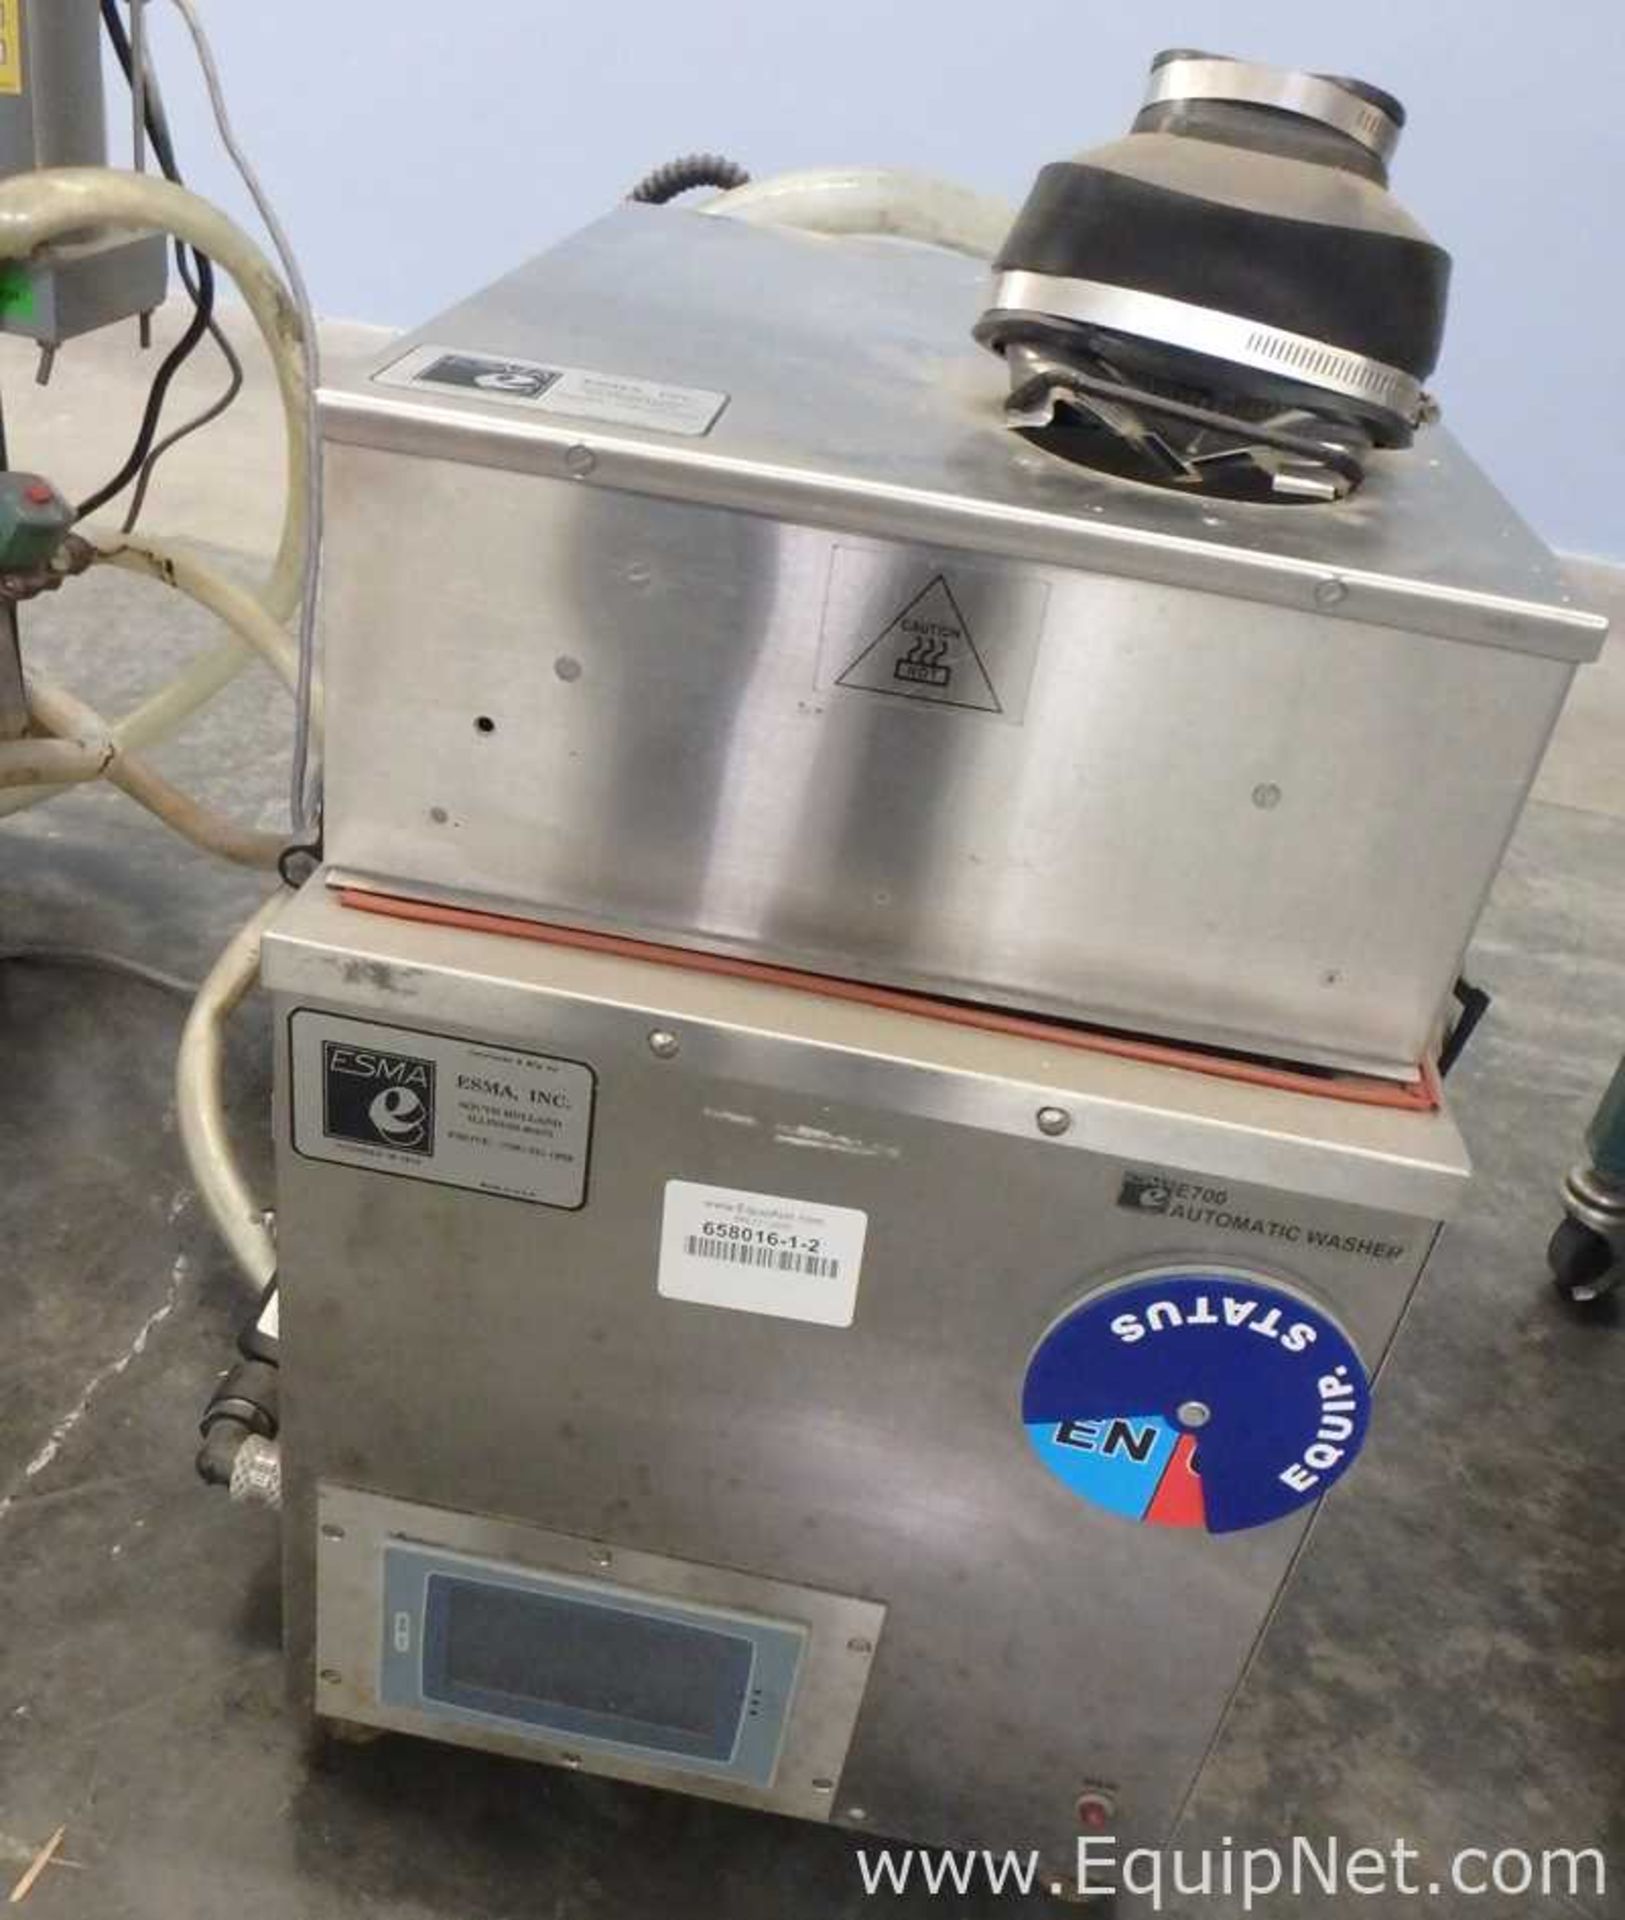 ESMA Inc. E700 Ultrasonic Cleaning System with E997 30Gal Heated Storage Tank - Image 16 of 38